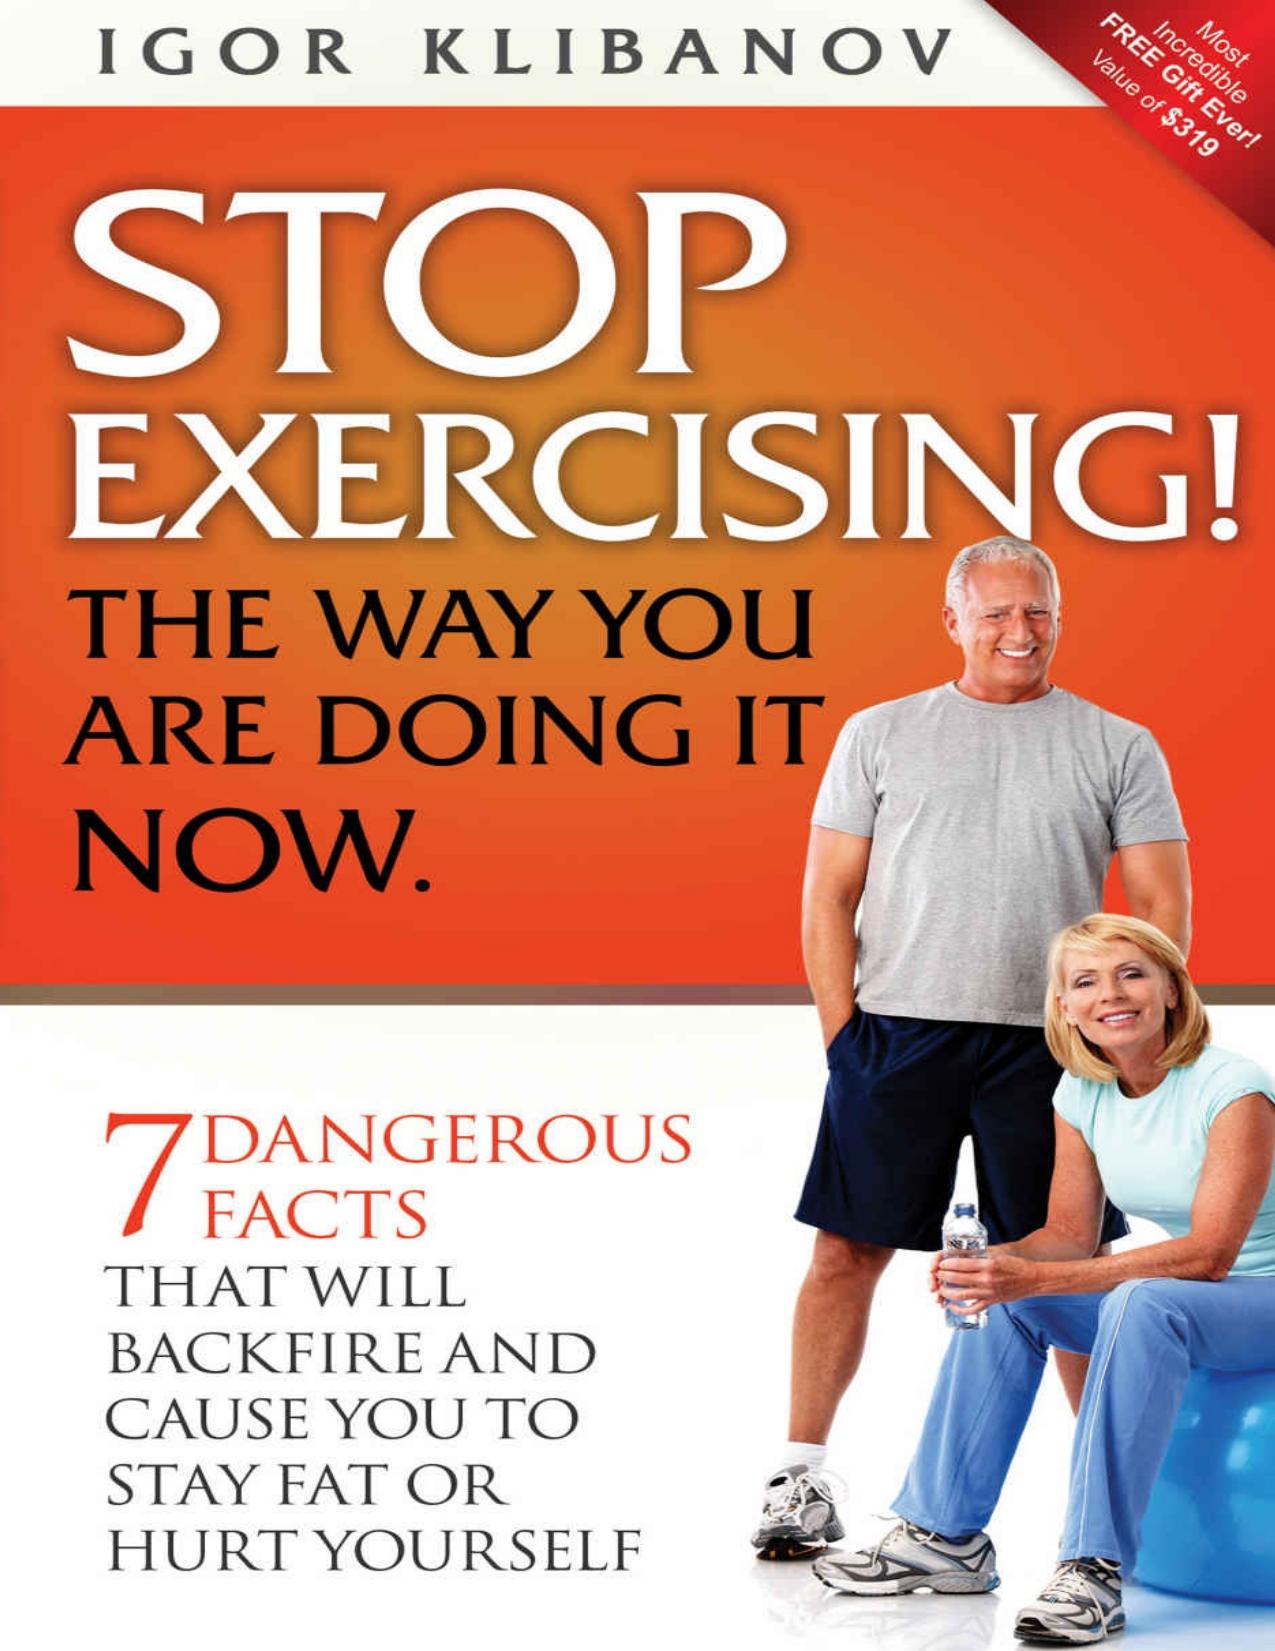 STOP EXERCISING! The Way You Are Doing it Now by Klibanov Igor